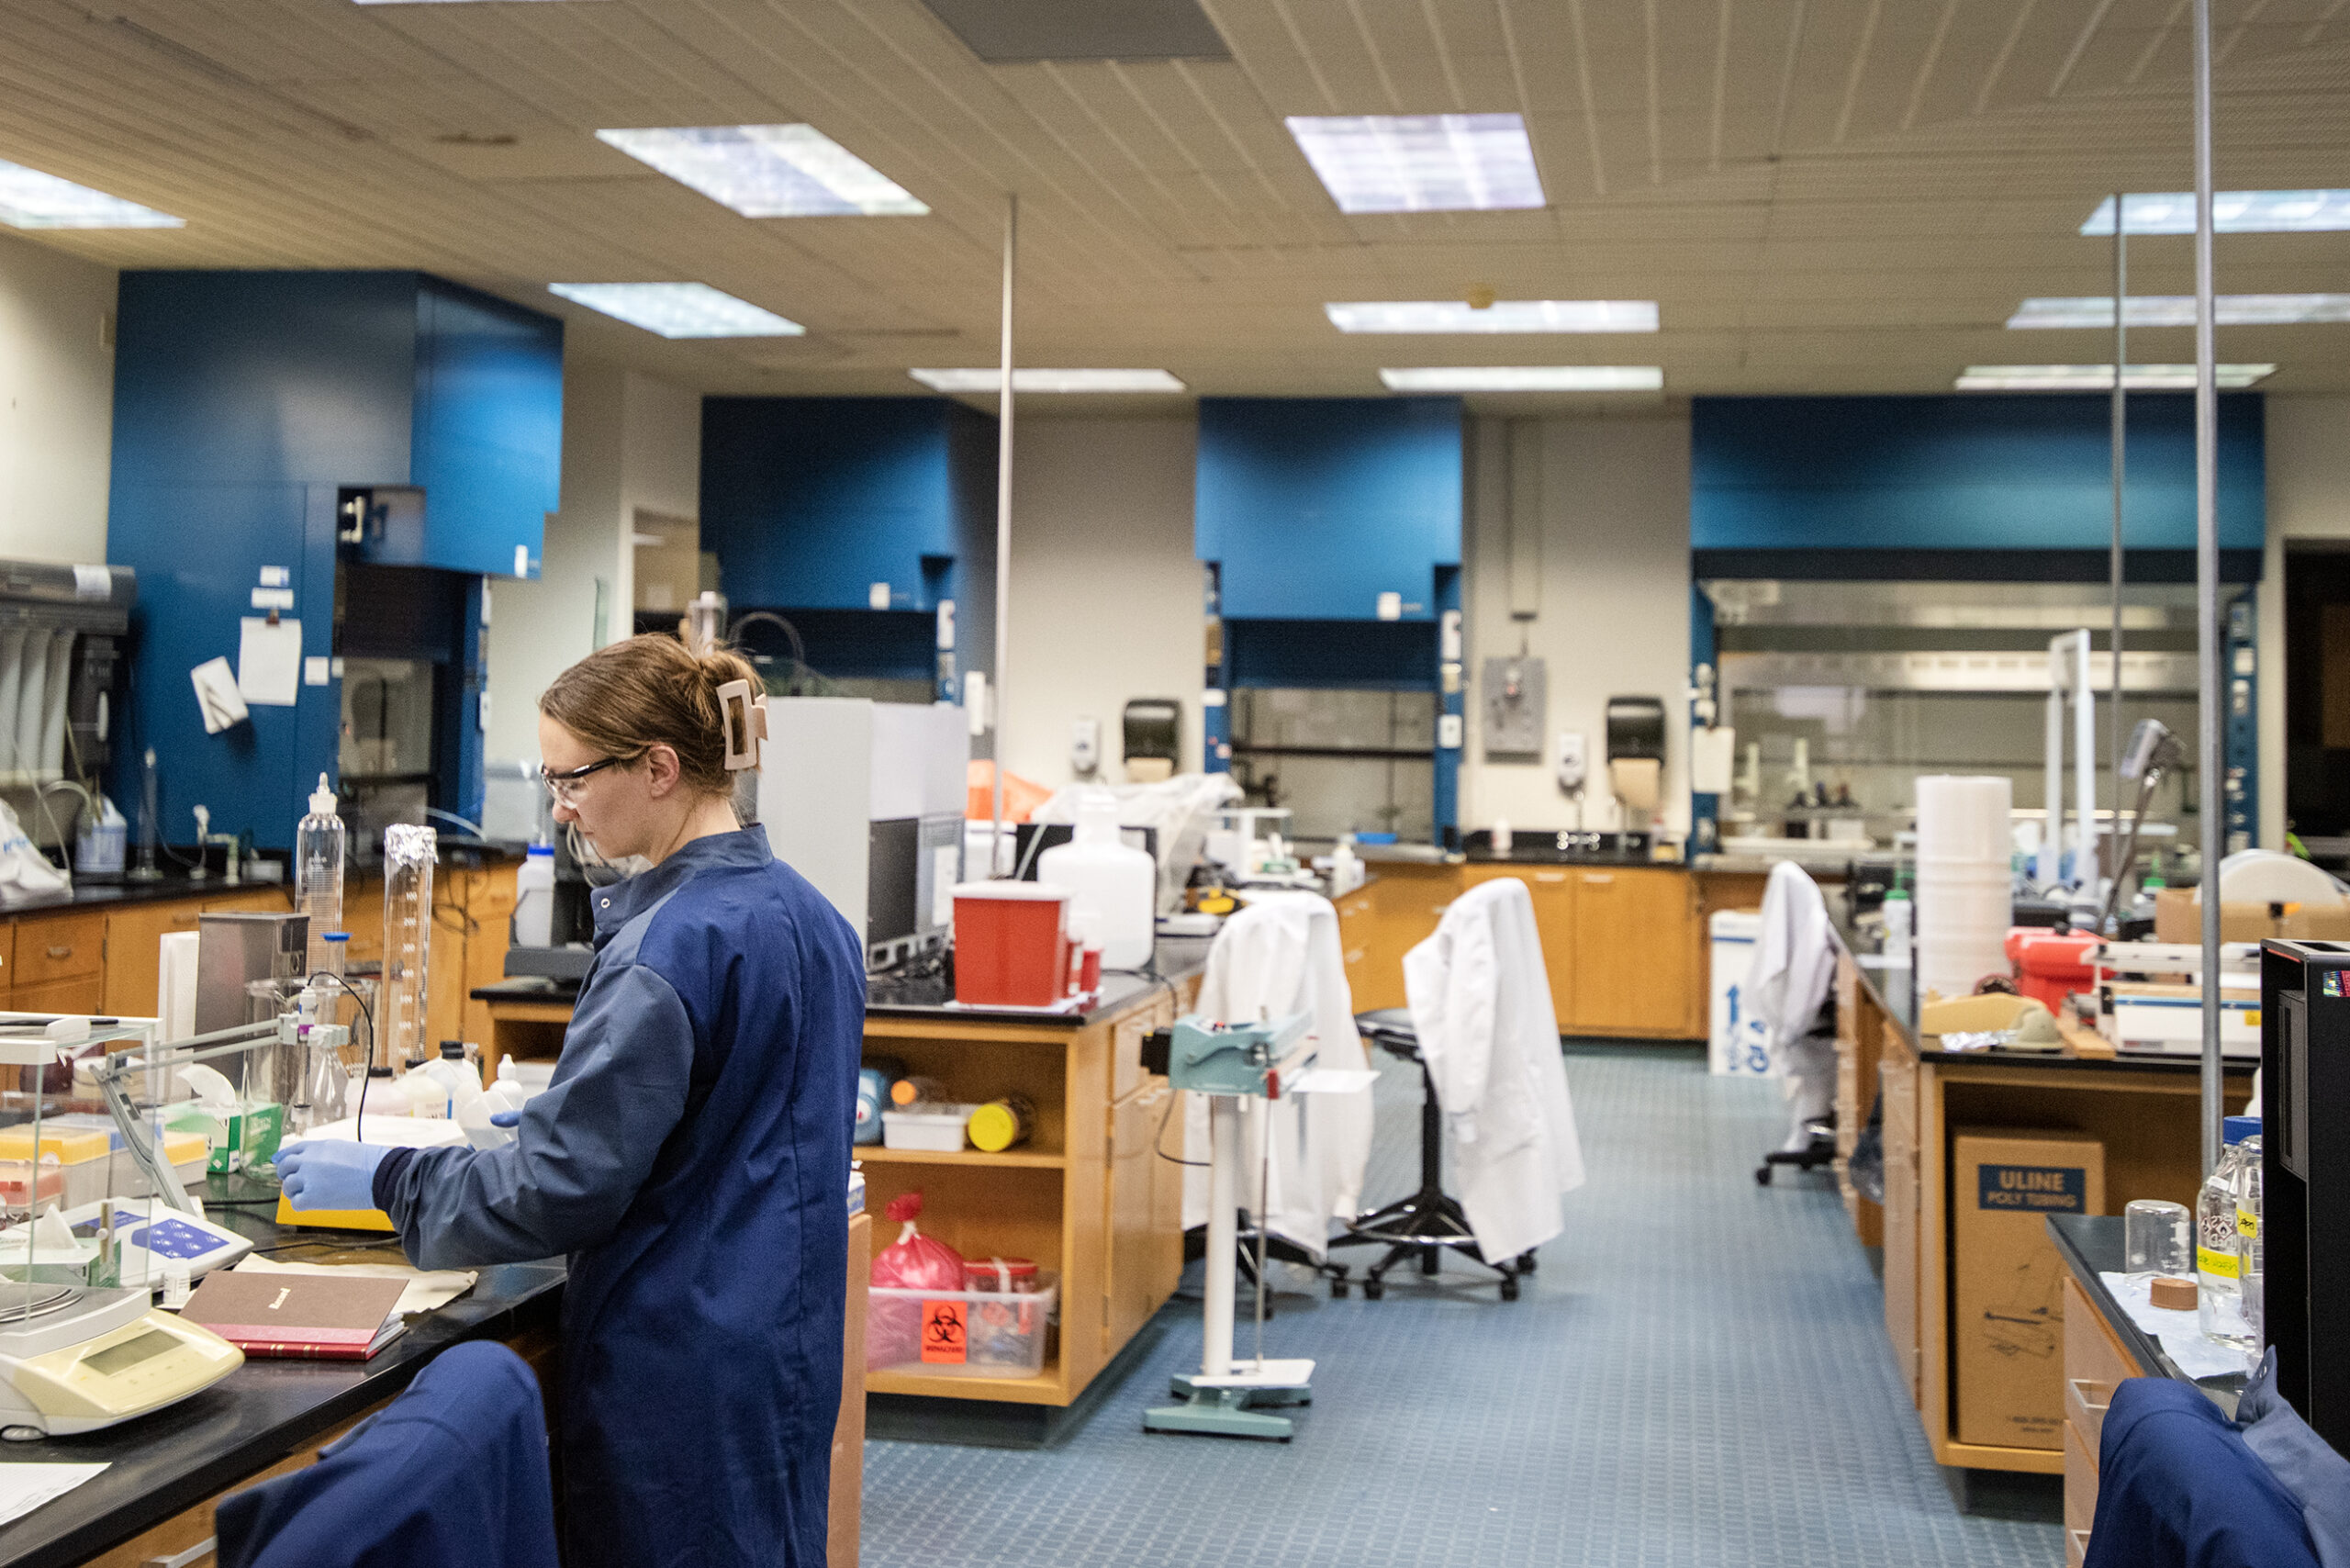 A woman in a blue lab coat works in a lab.